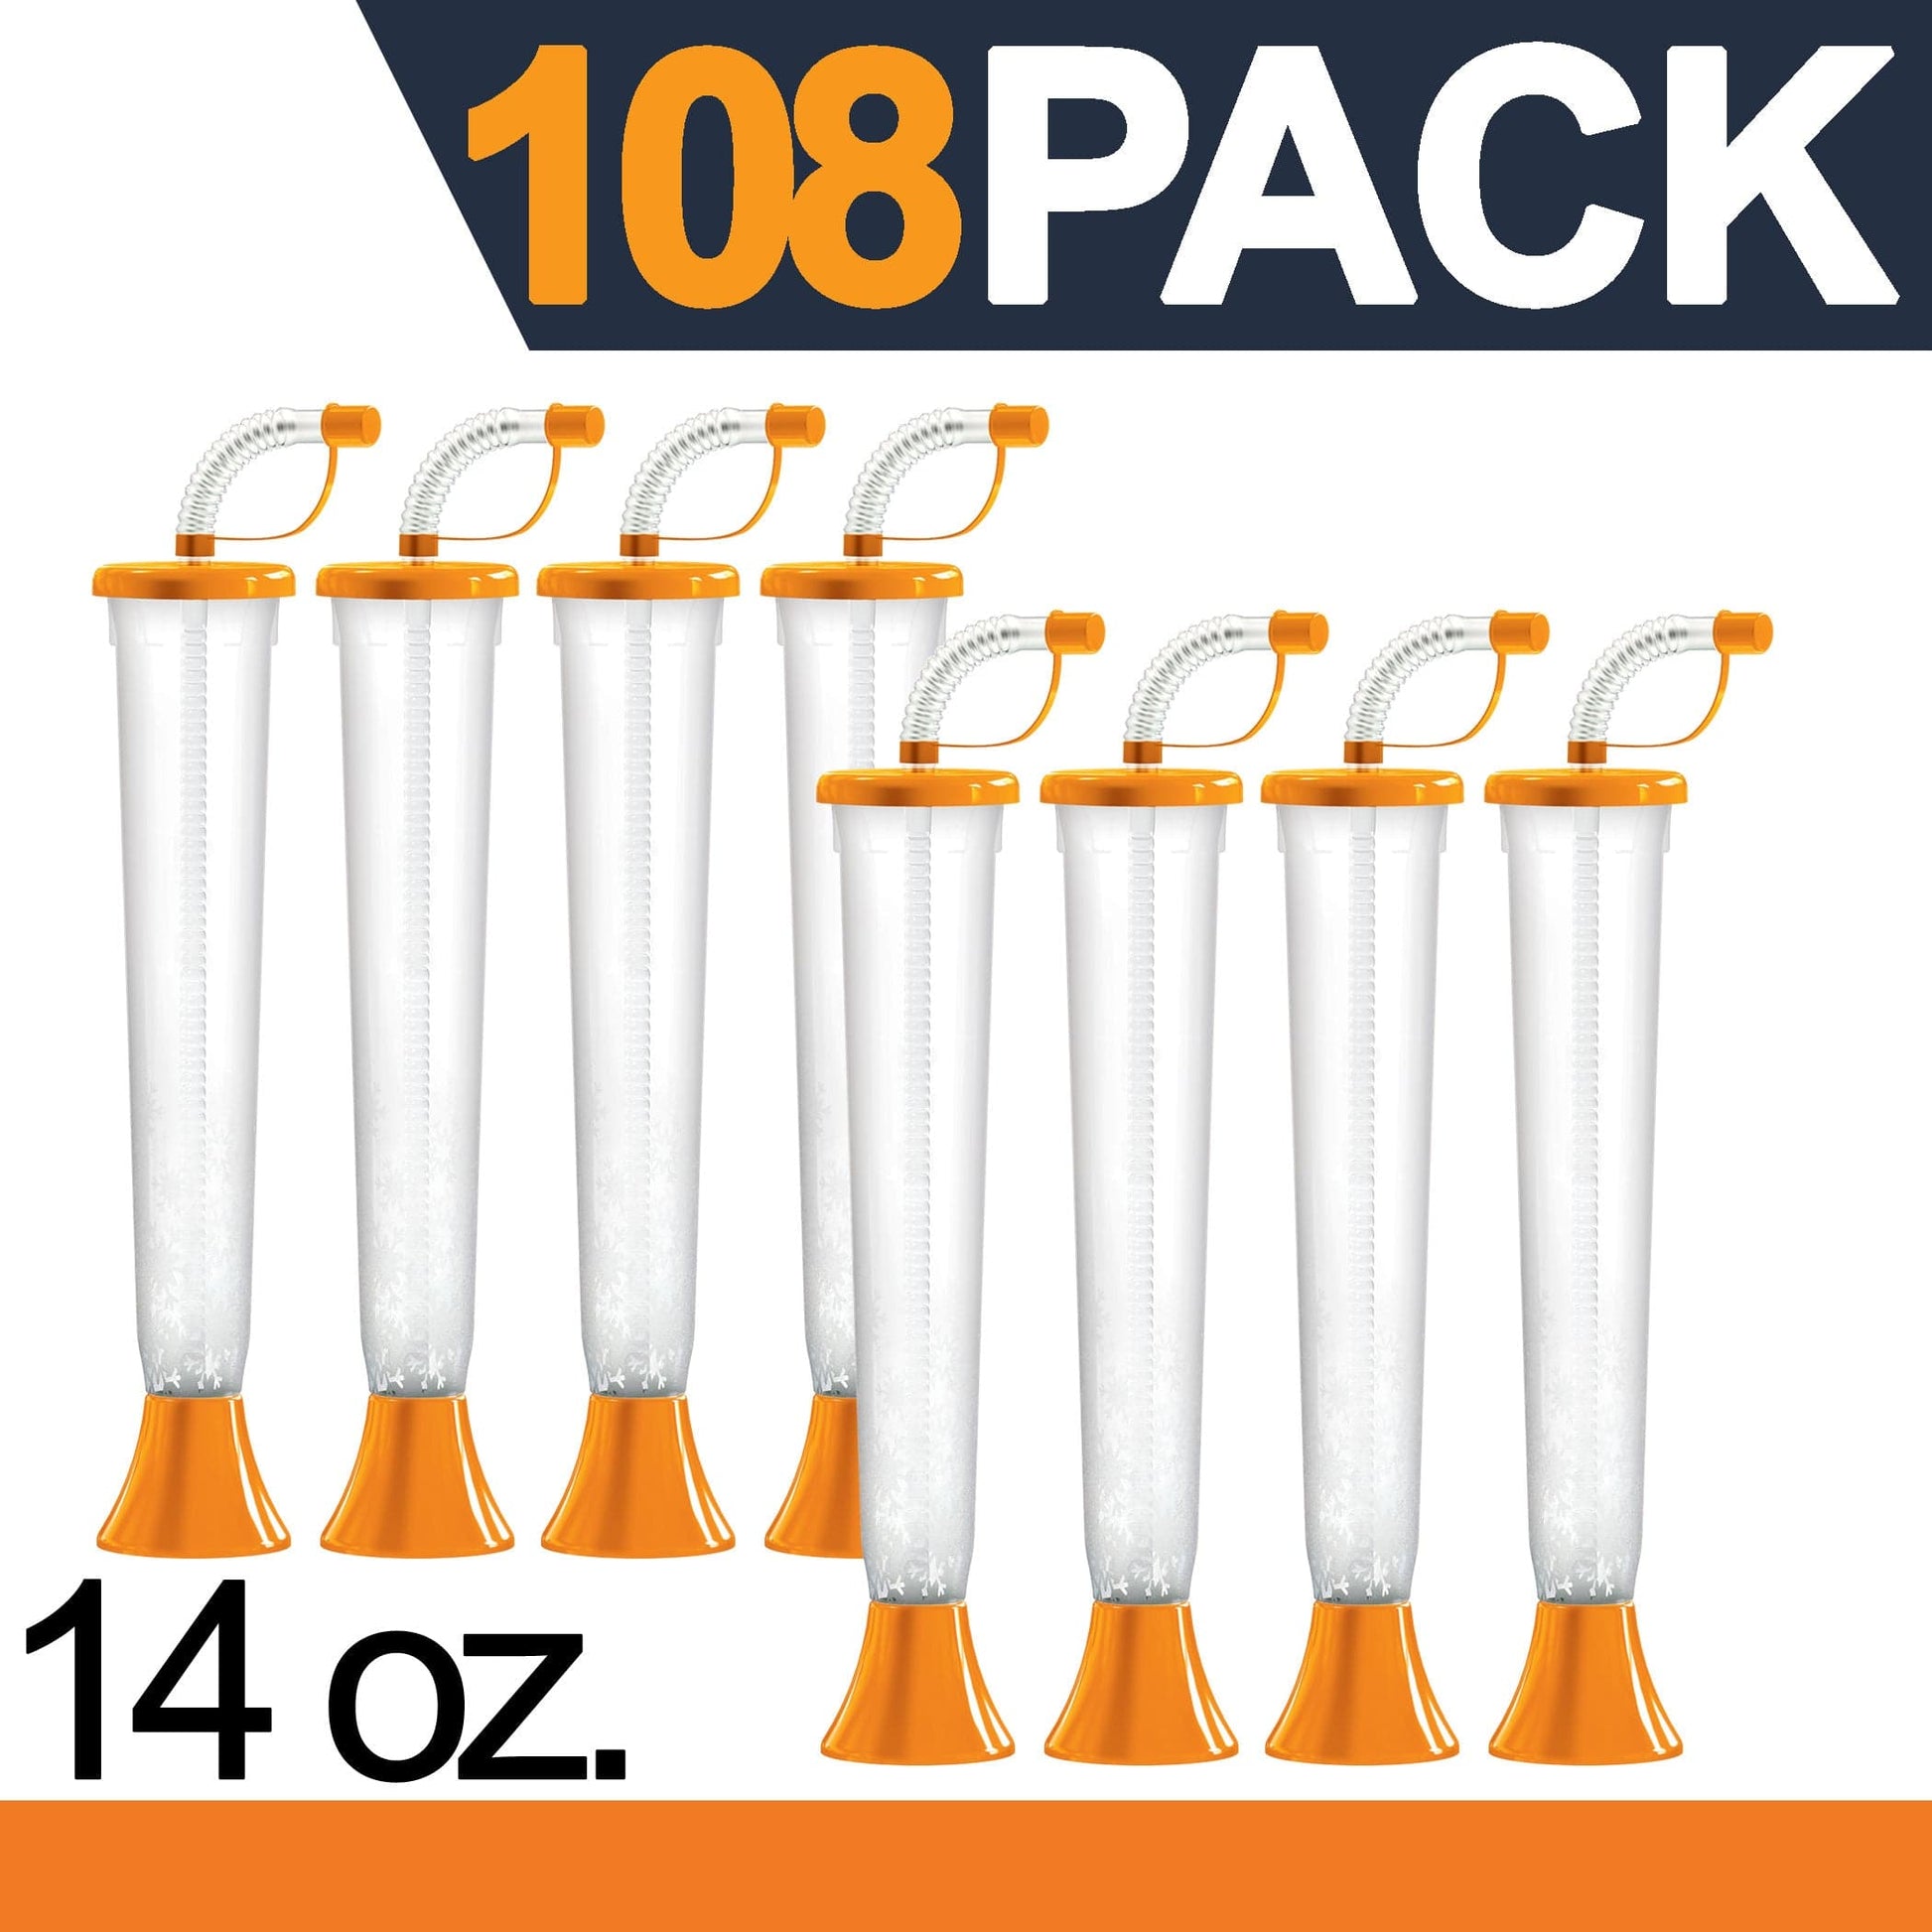 Sweet World USA Yard Cups 108 Cups Yard Cups with ORANGE Lids and Straws - for Margaritas, Cold Drinks, Frozen Drinks, Kids Party - 14 oz. (400 ml) cups with lids and straws